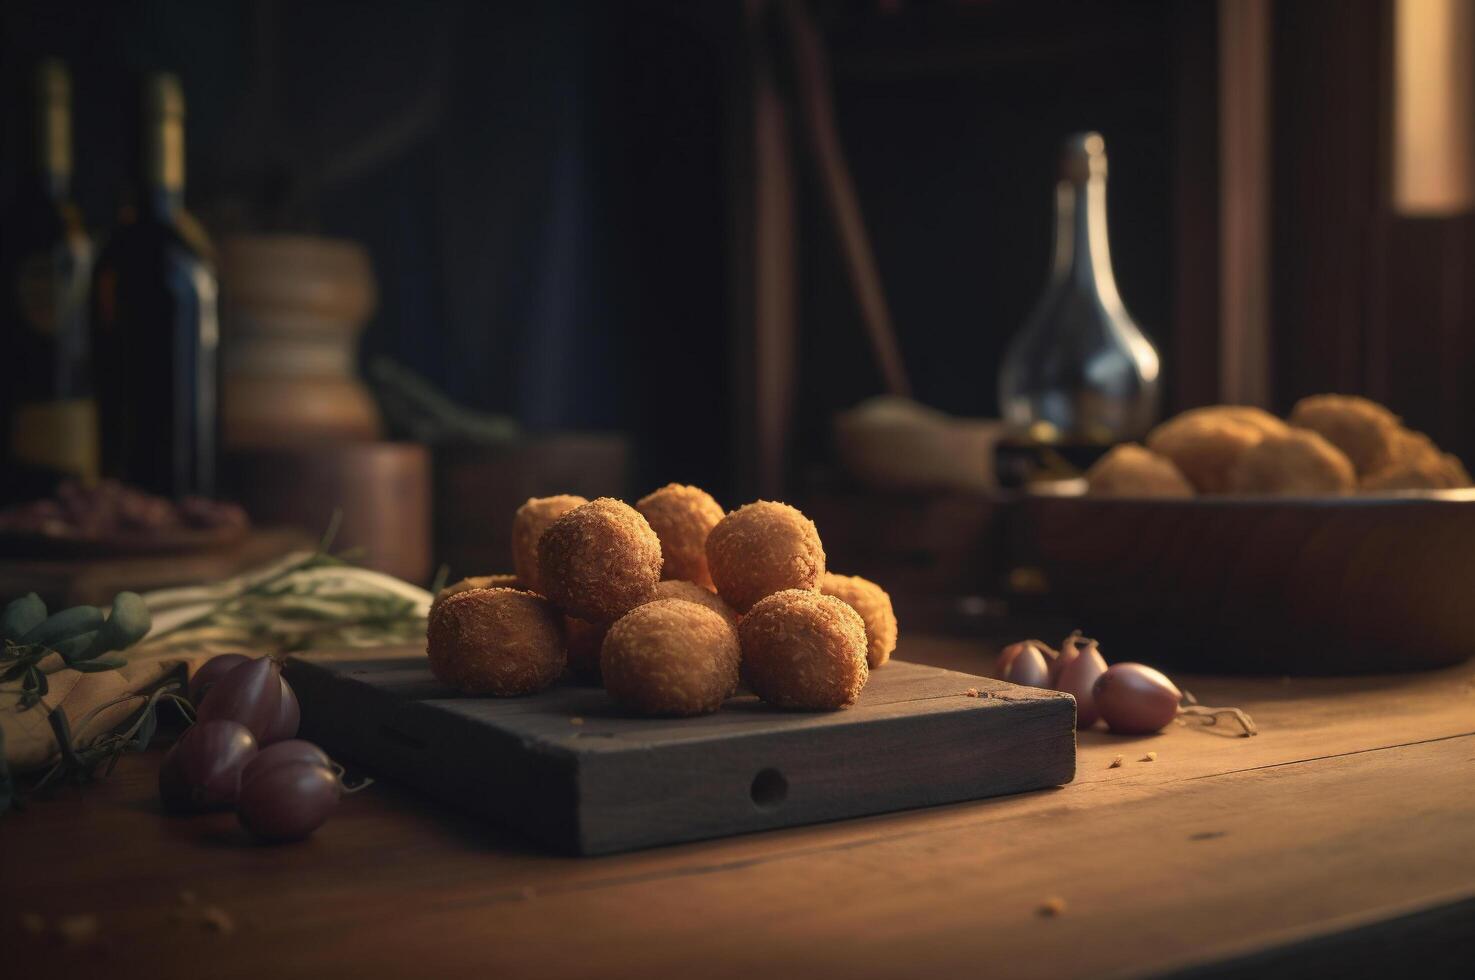 Delicious homemade croquettes on wooden table in rustic kitchen background. photo